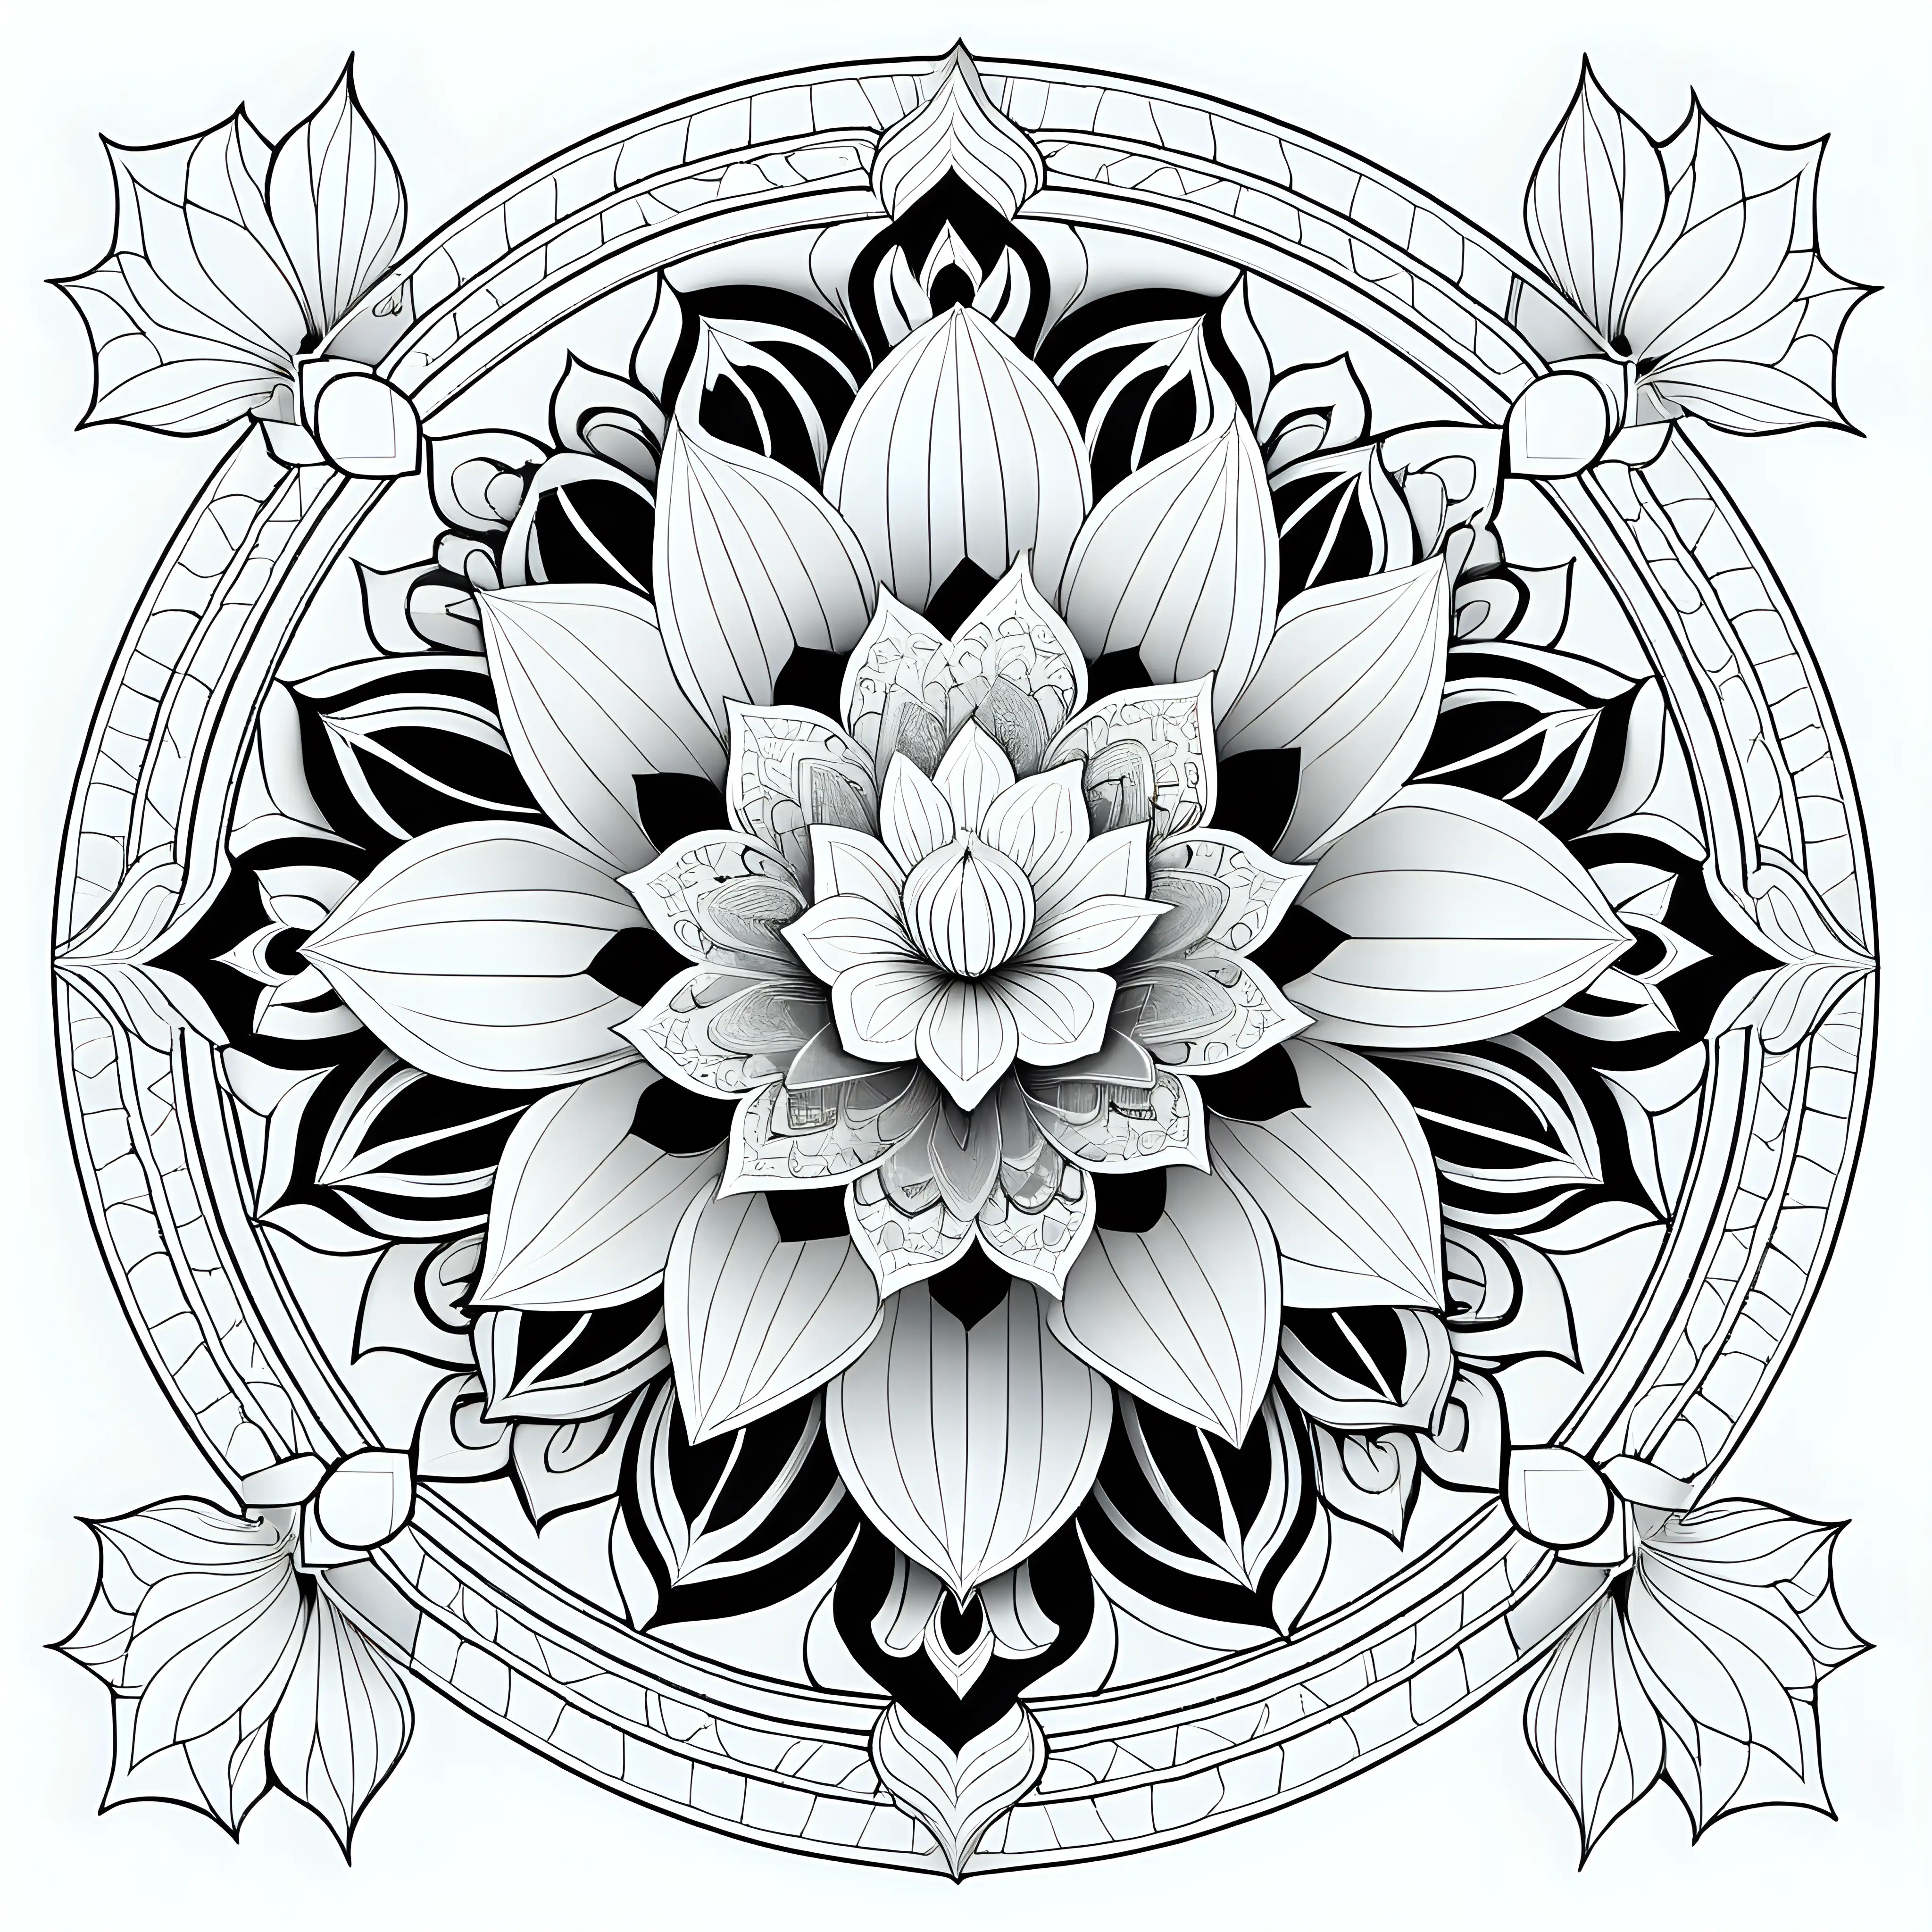 Coloring page with a lotus flower in the center of a detailed and very defined 3d mandala on a white background, no color